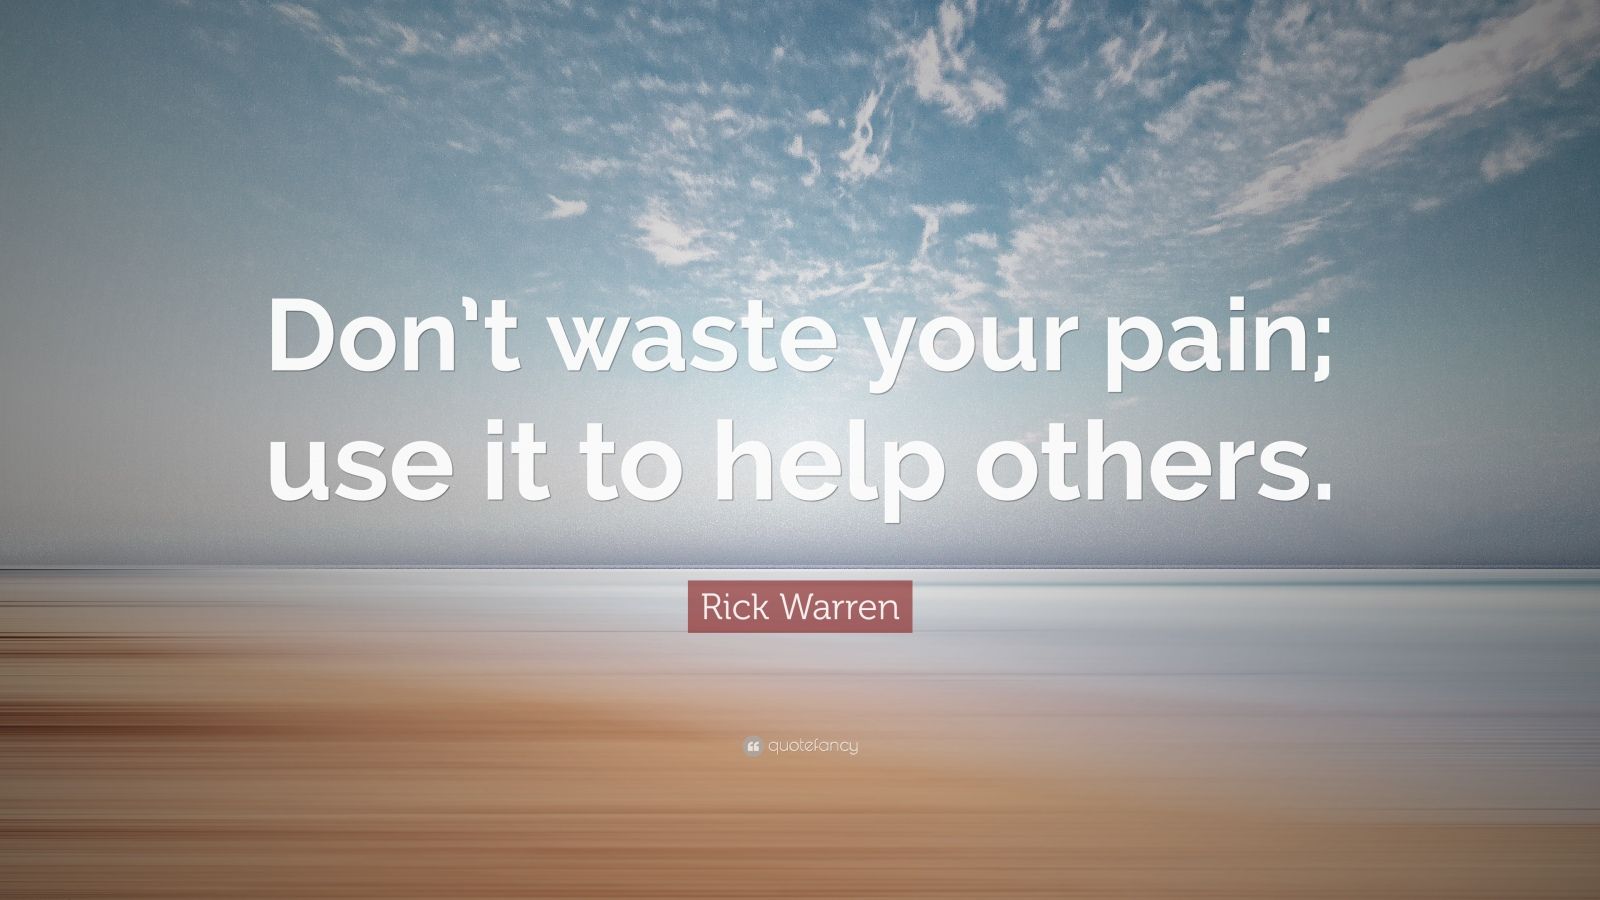 Rick Warren Quote: “Don’t waste your pain; use it to help others.” (12 ...